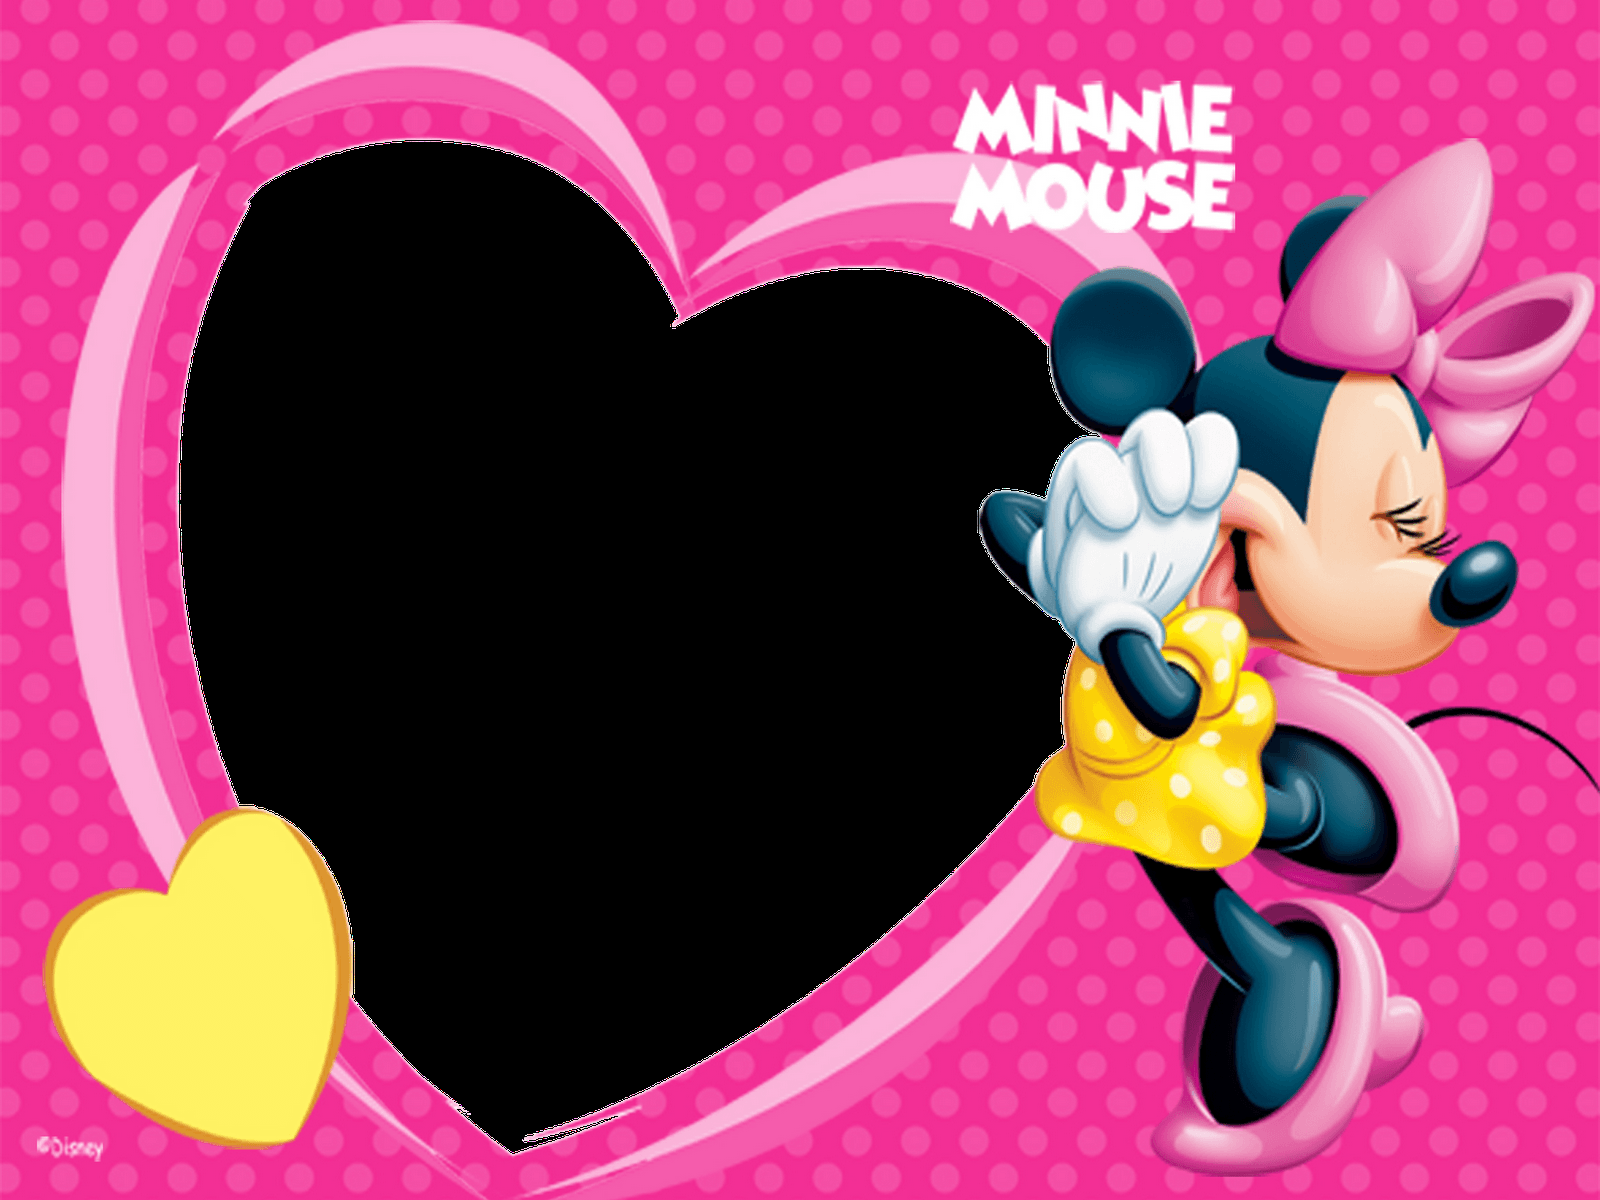 Minnie Mouse Hd Wallpapers For Ios 8 Cartoons Wallpapers Regarding.